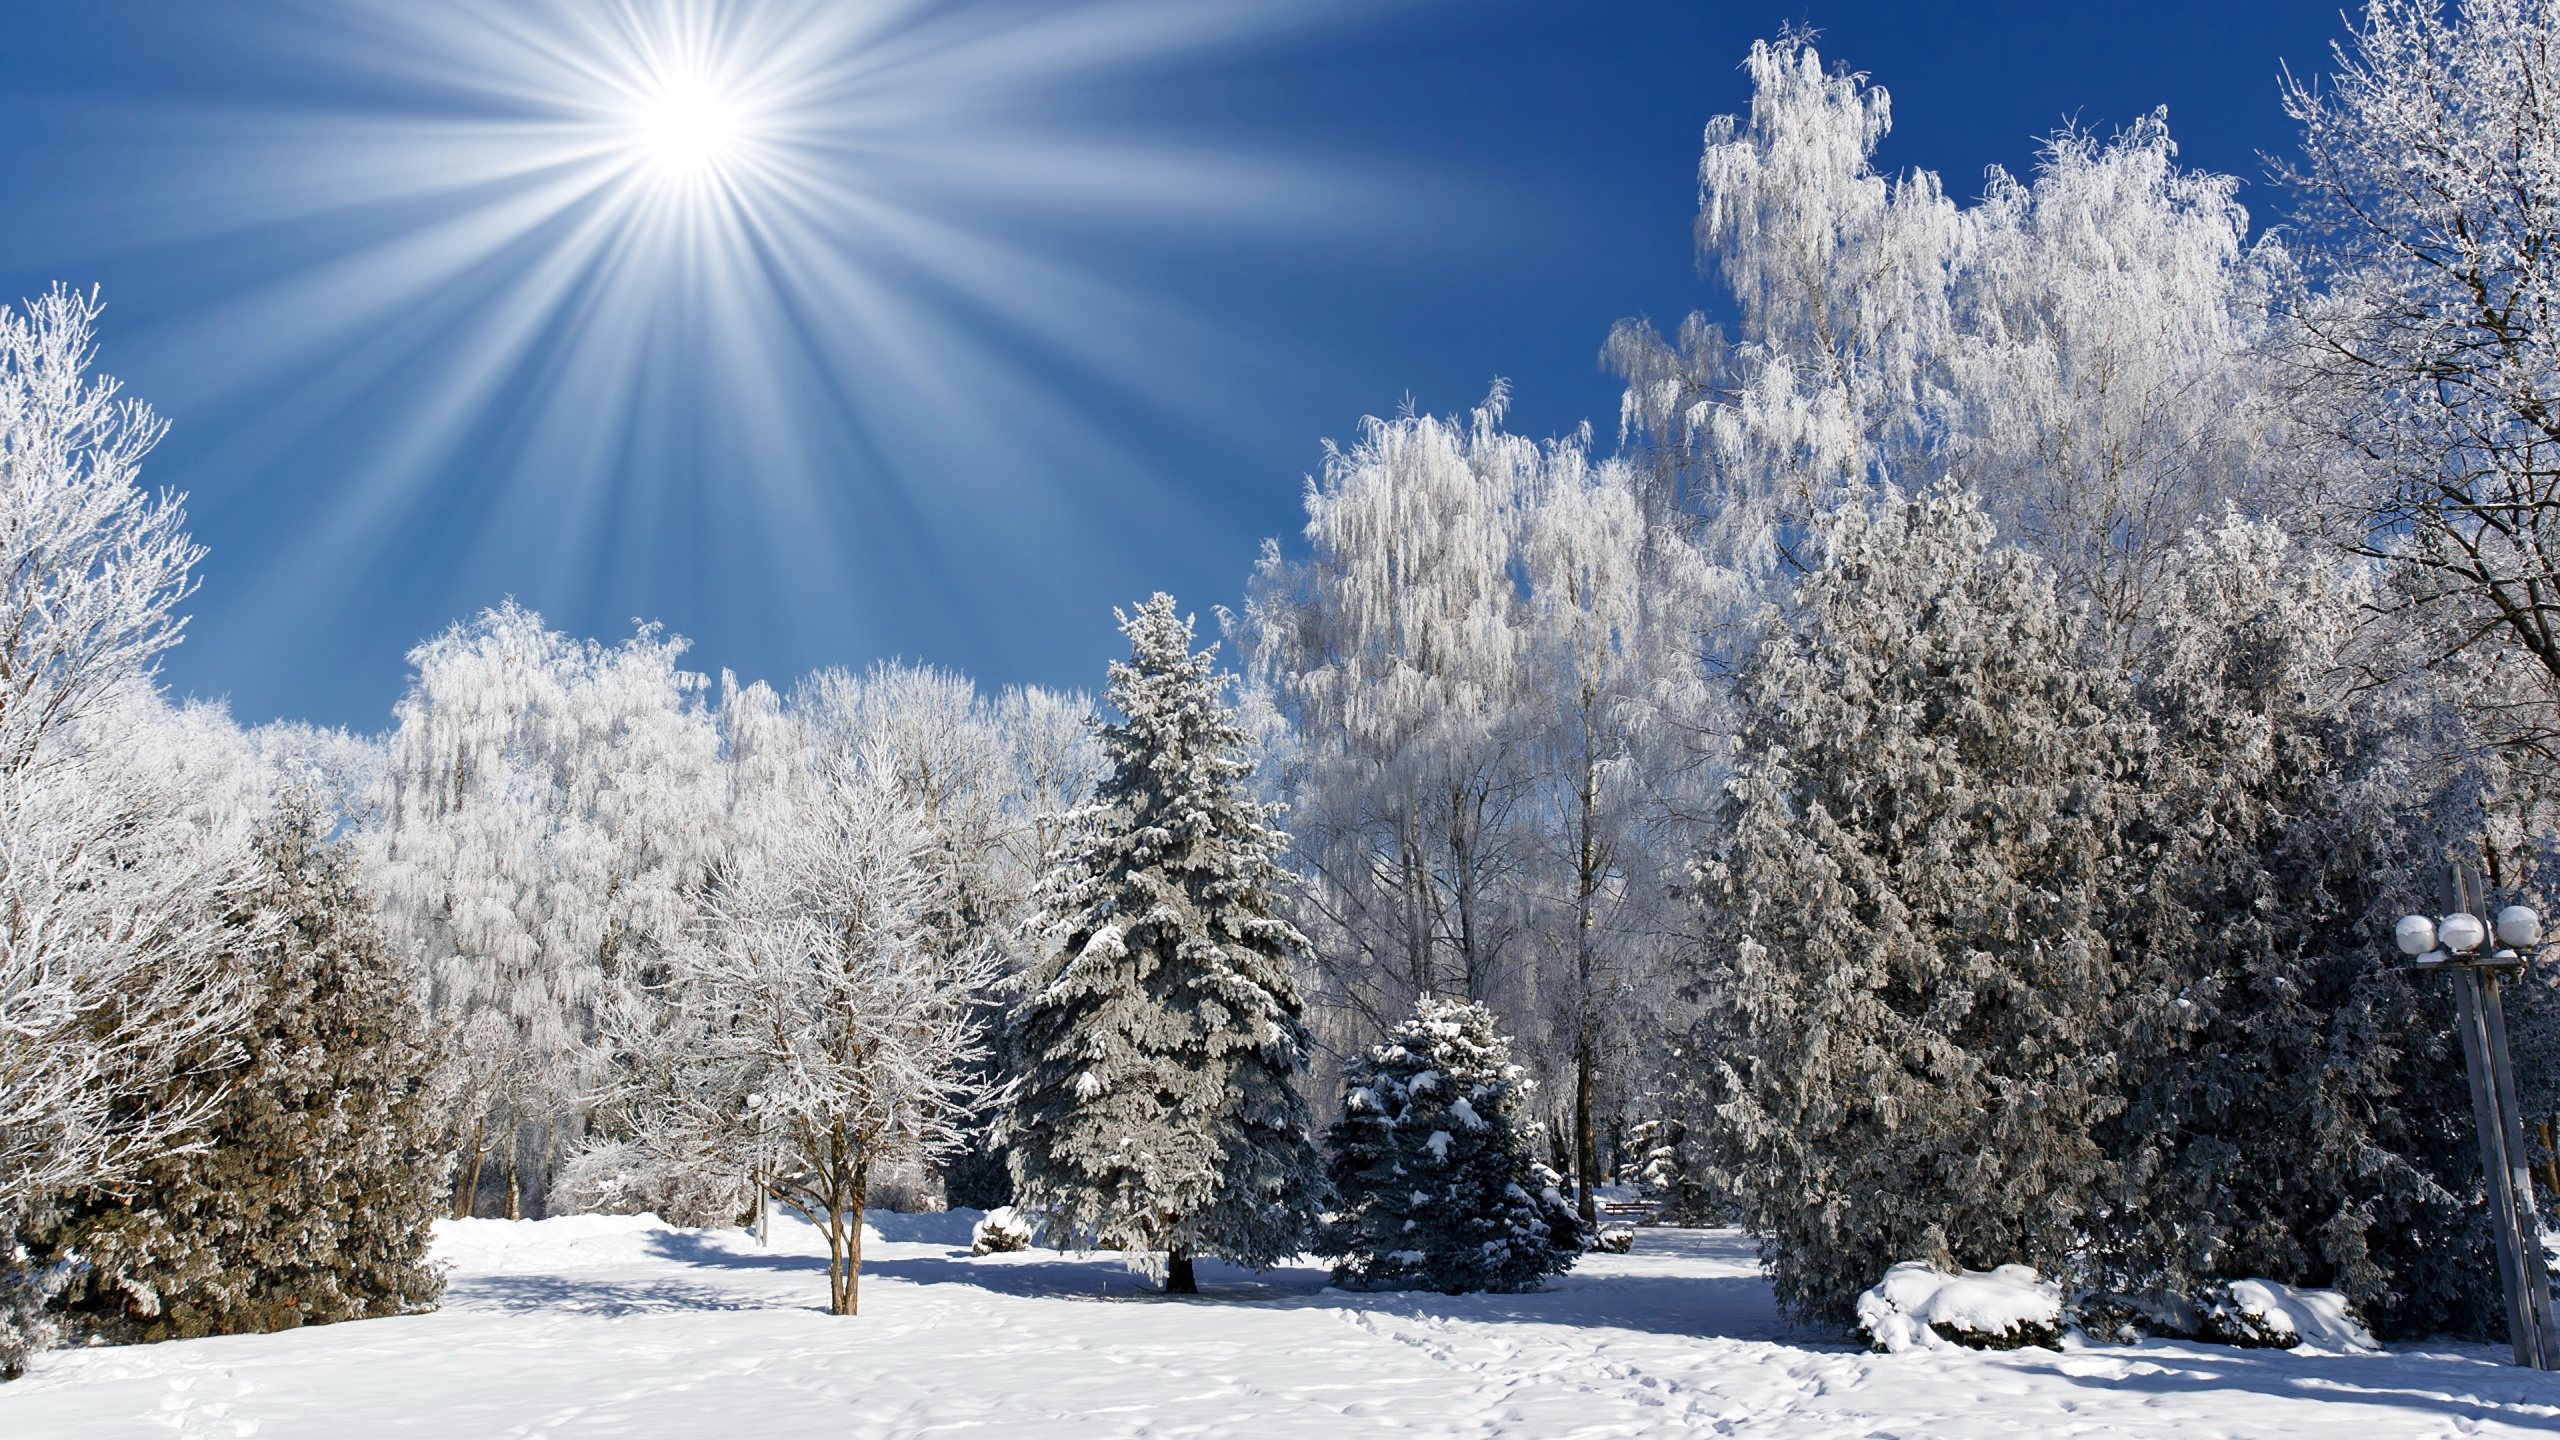 Snow Covered Trees Under Blue Sky During Daytime. Wallpaper in 2560x1440 Resolution